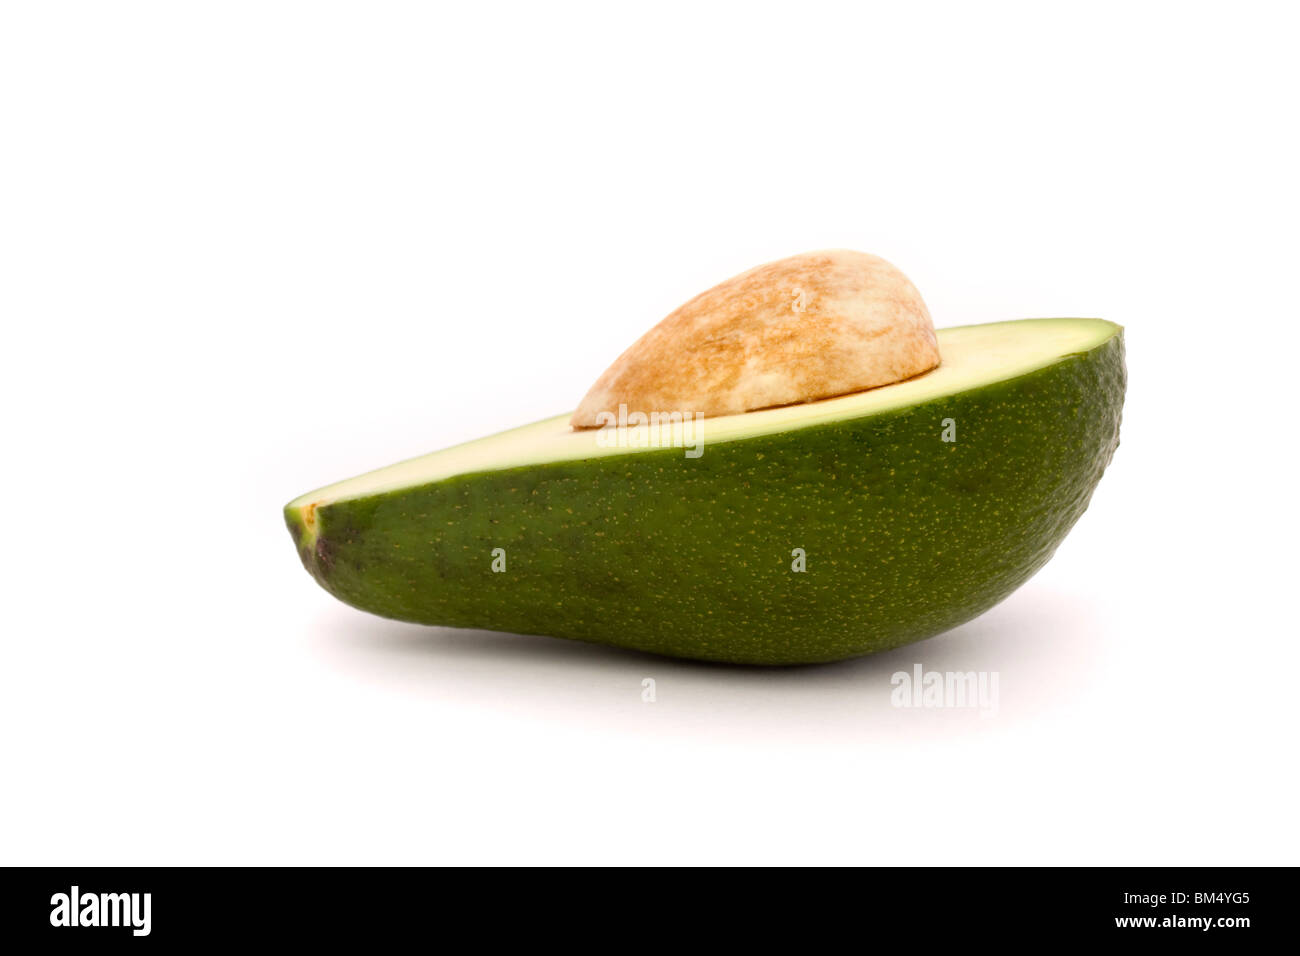 half an avocado with stone isolated on a white background Stock Photo